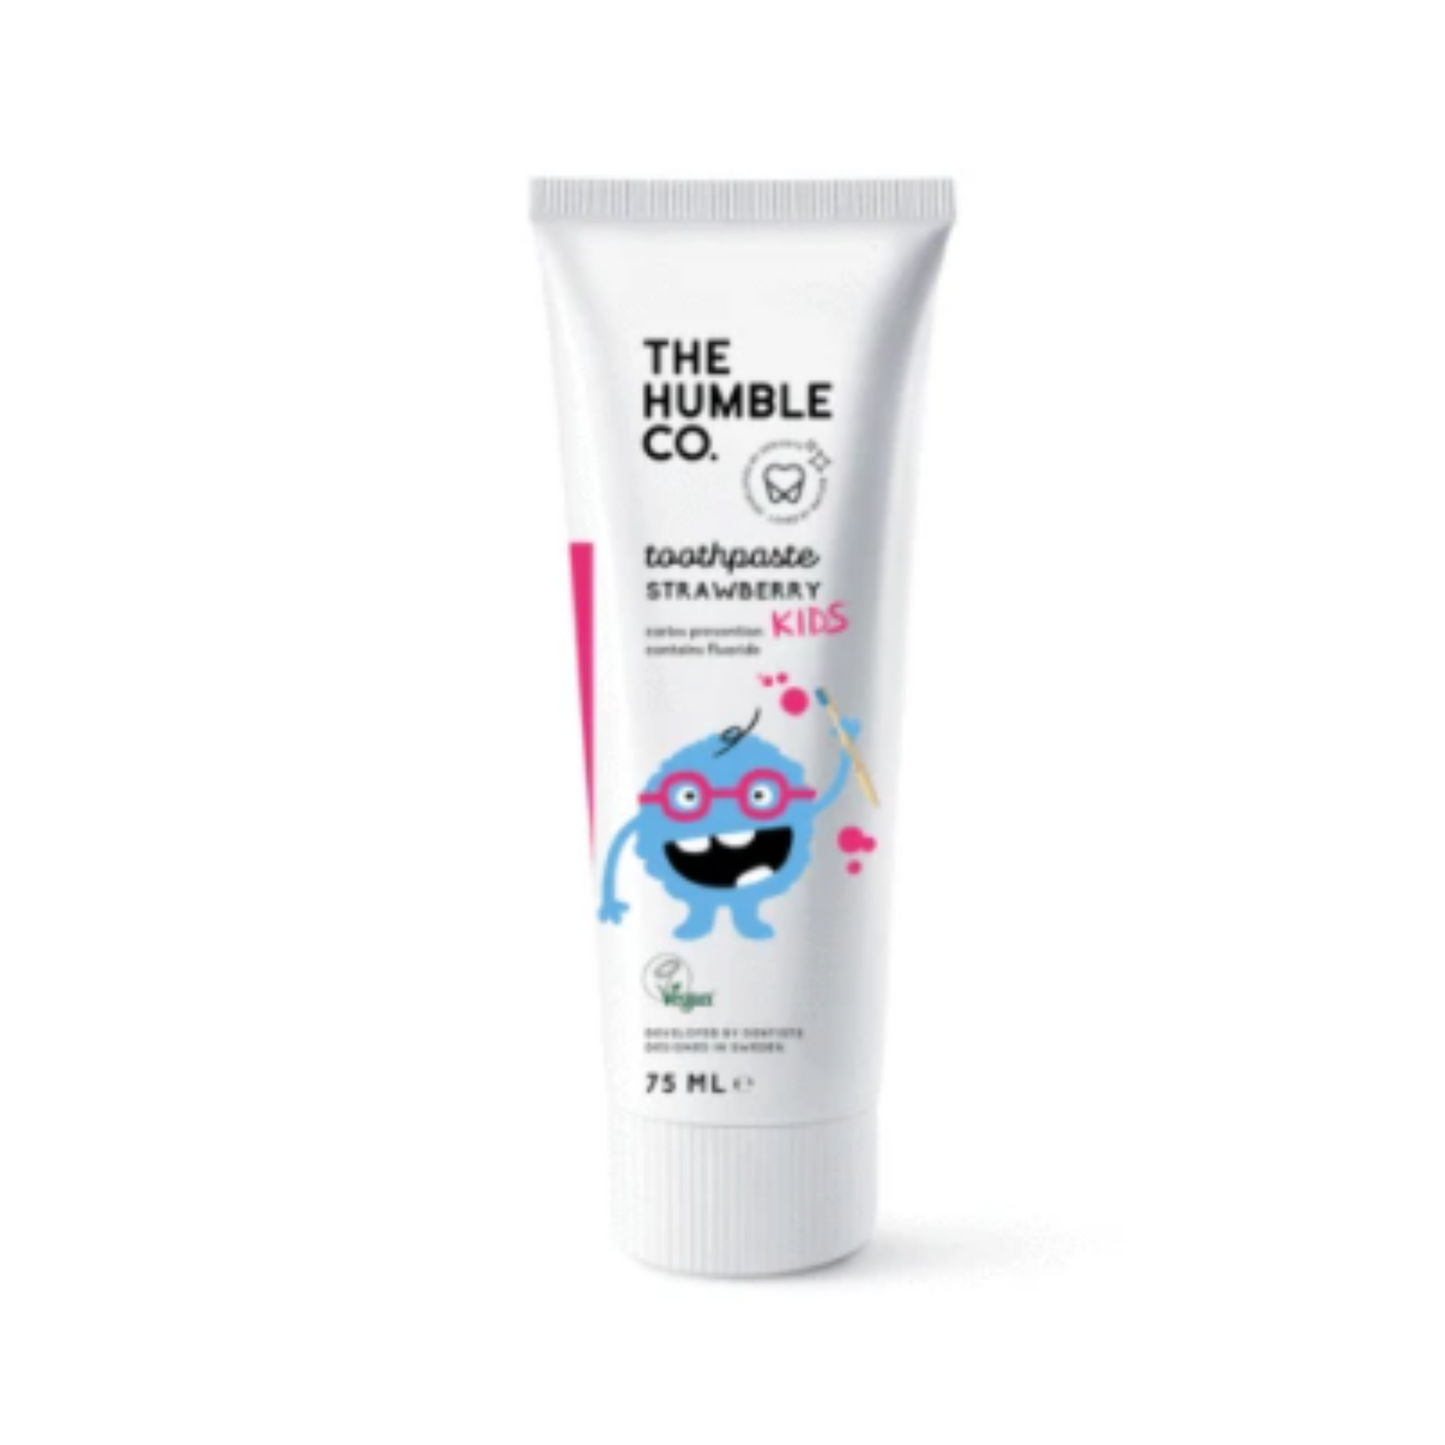 THE HUMBLE CO. Kids Toothpaste Strawberry with Fluoride (4449805008961)